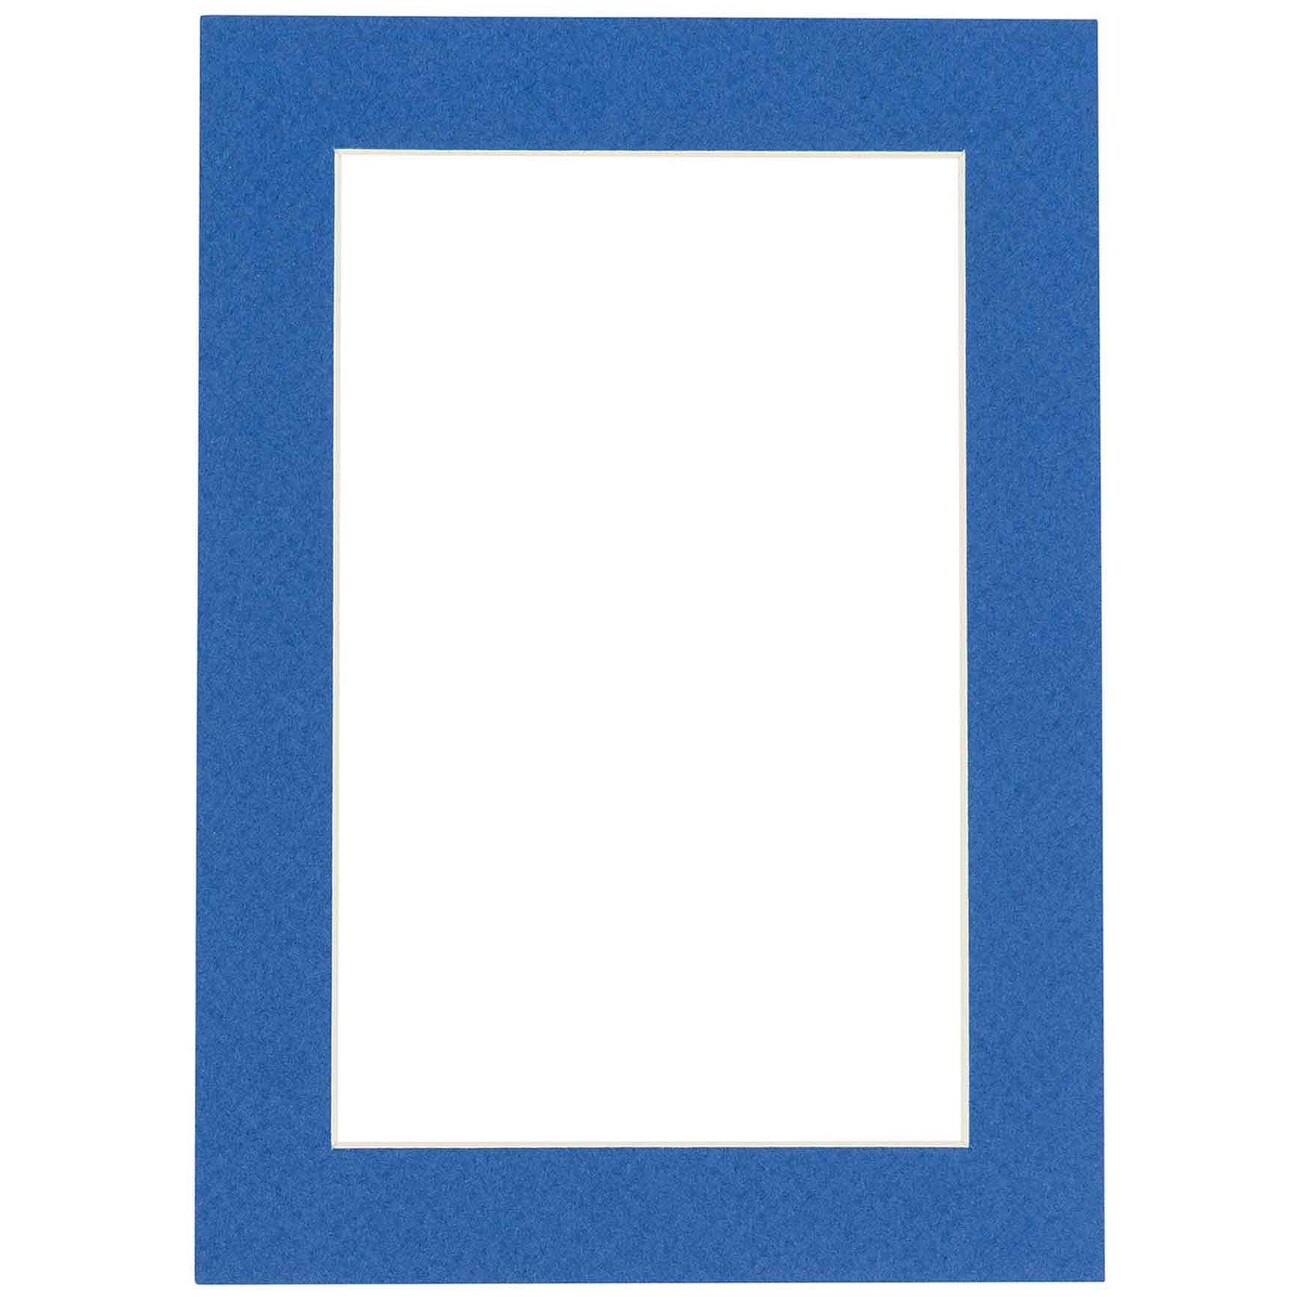 5x7 Mat for 8x10 Frame - Precut Mat Board Acid-Free Royal Blue 5x7 Photo  Matte Made to Fit a 8x10 Picture Frame, Premium Matboard for Family Photos